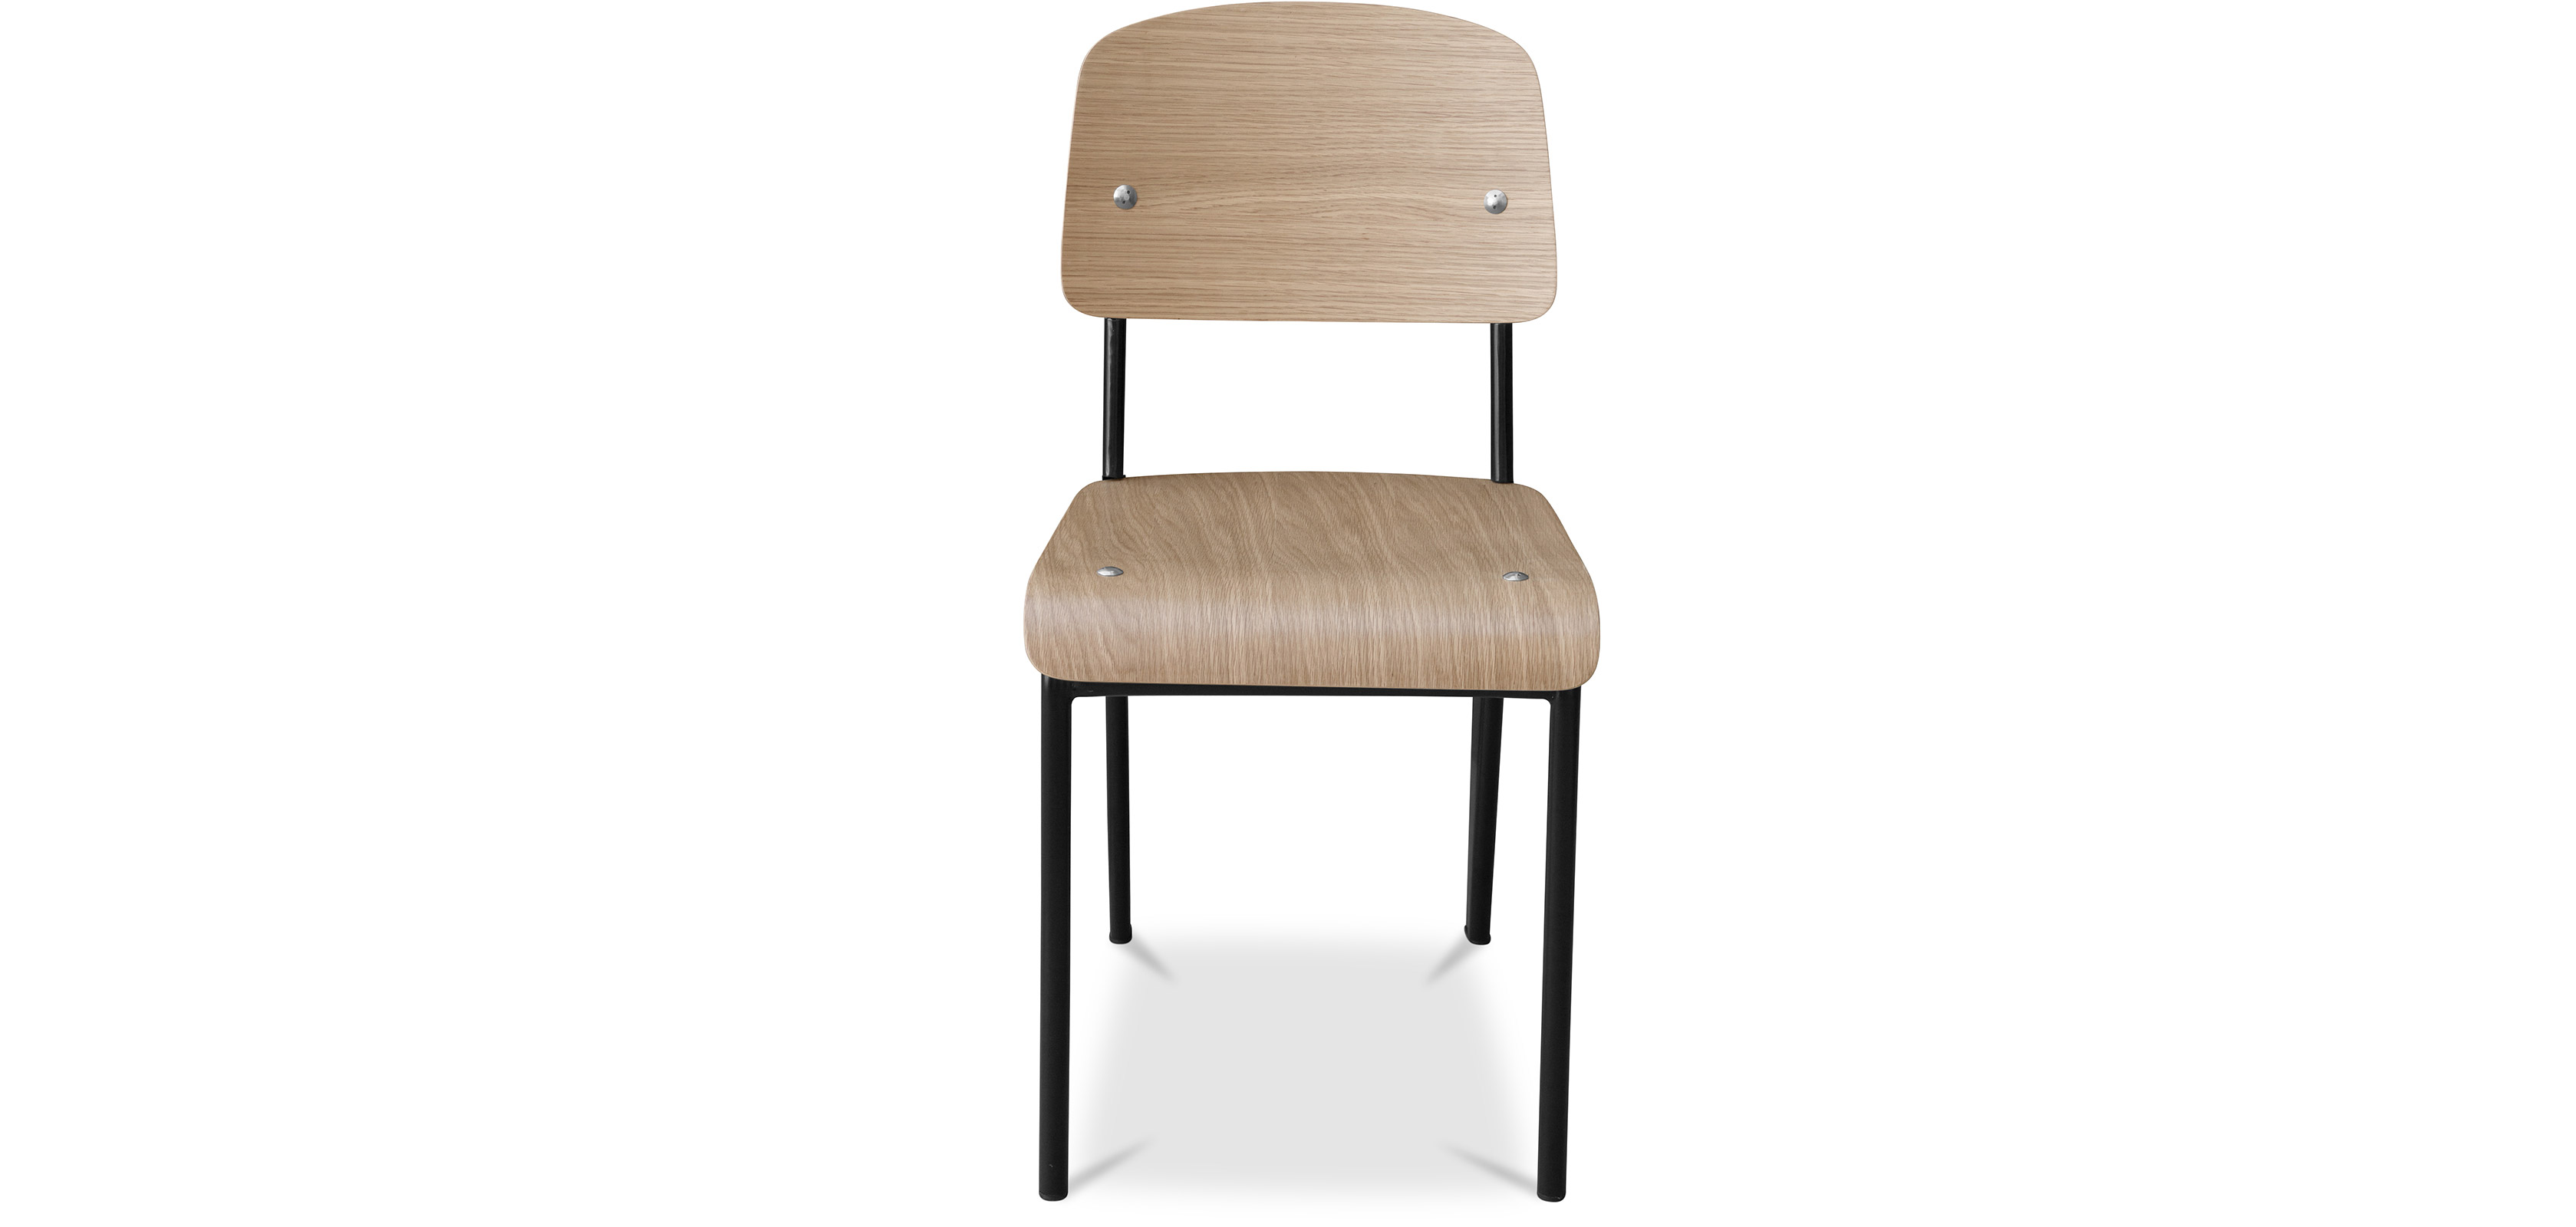 Buy A++ LEVEL Design Chair - Wood Natural wood 16456 in the UK ...